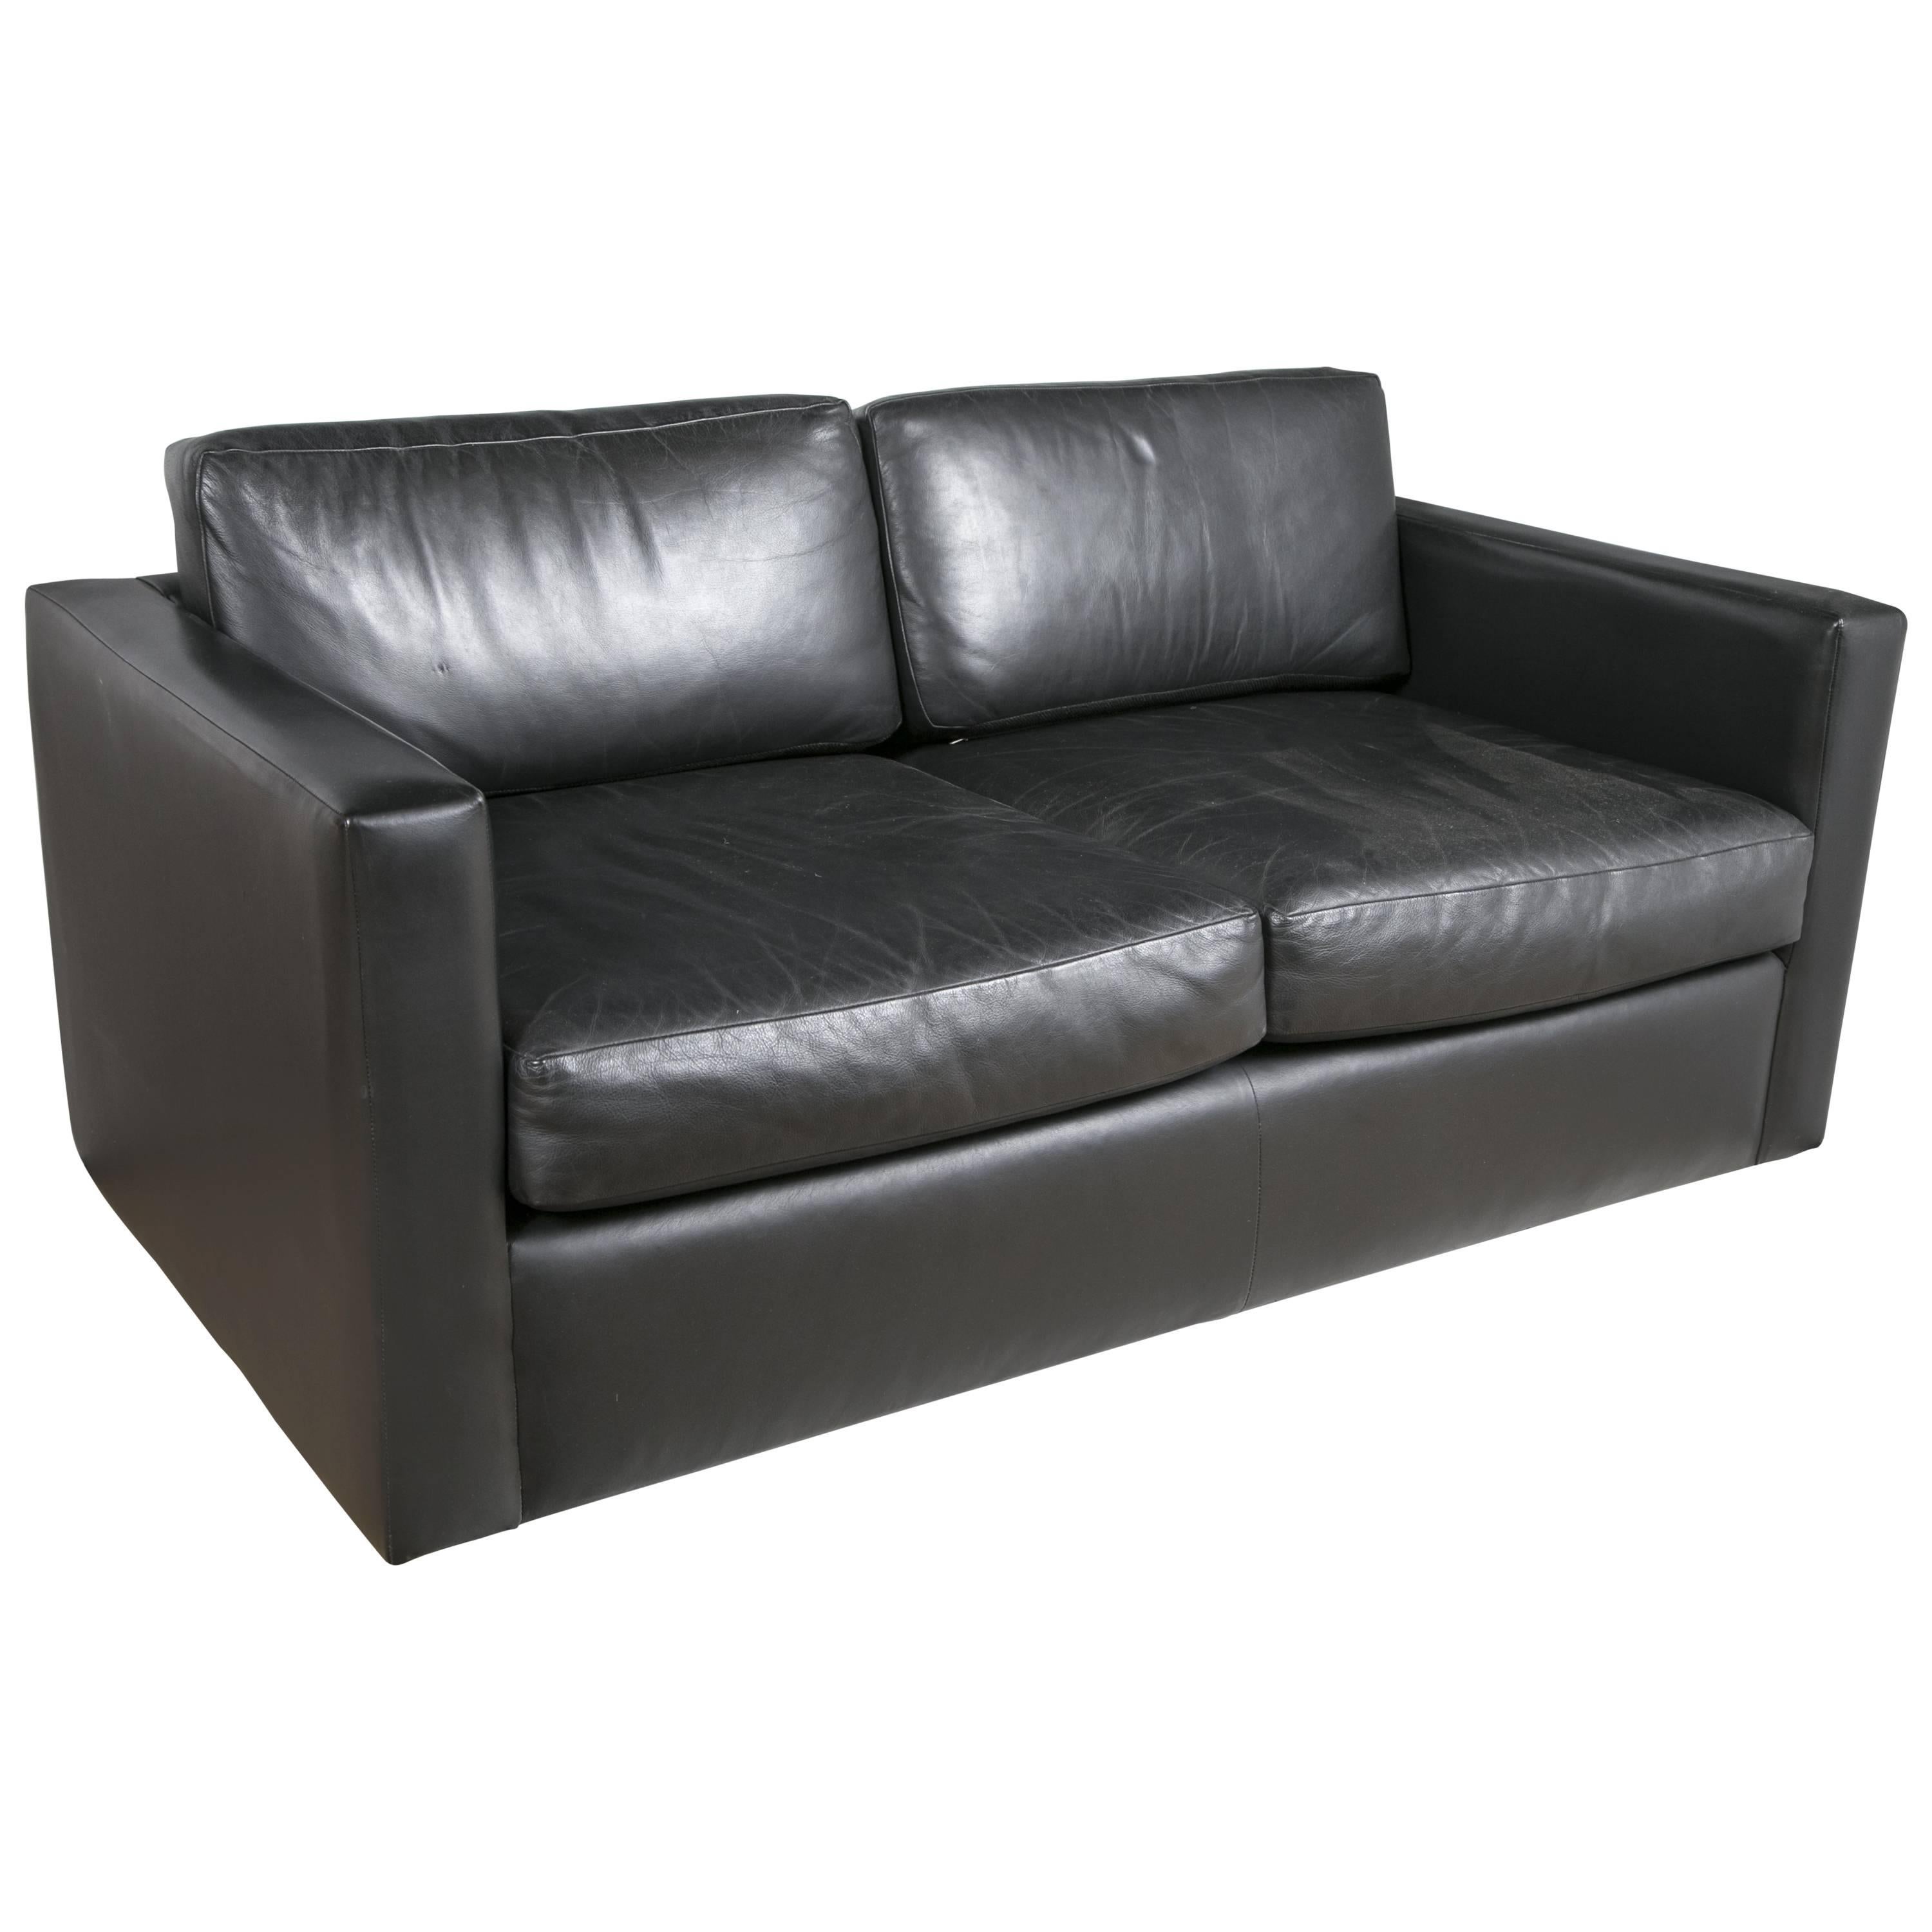 Charles Pfister for Knoll Settee in Black Leather